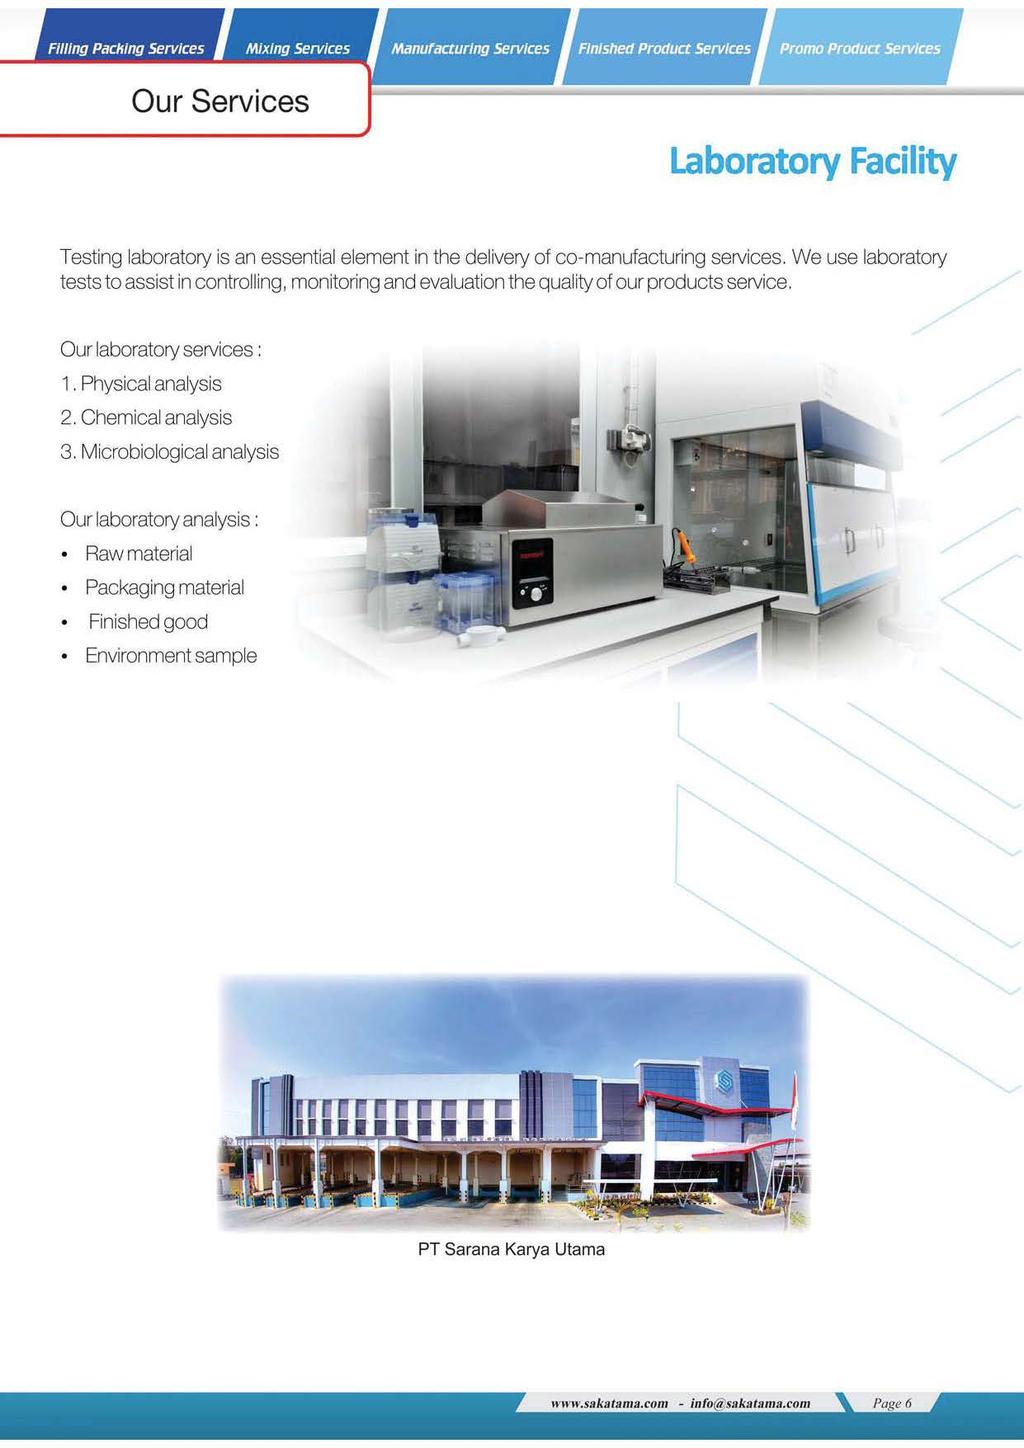 Promo Producr Services Our Services Laboratory Facility Testing laboratory is an essential element in the delivery of co-manufacturing services.